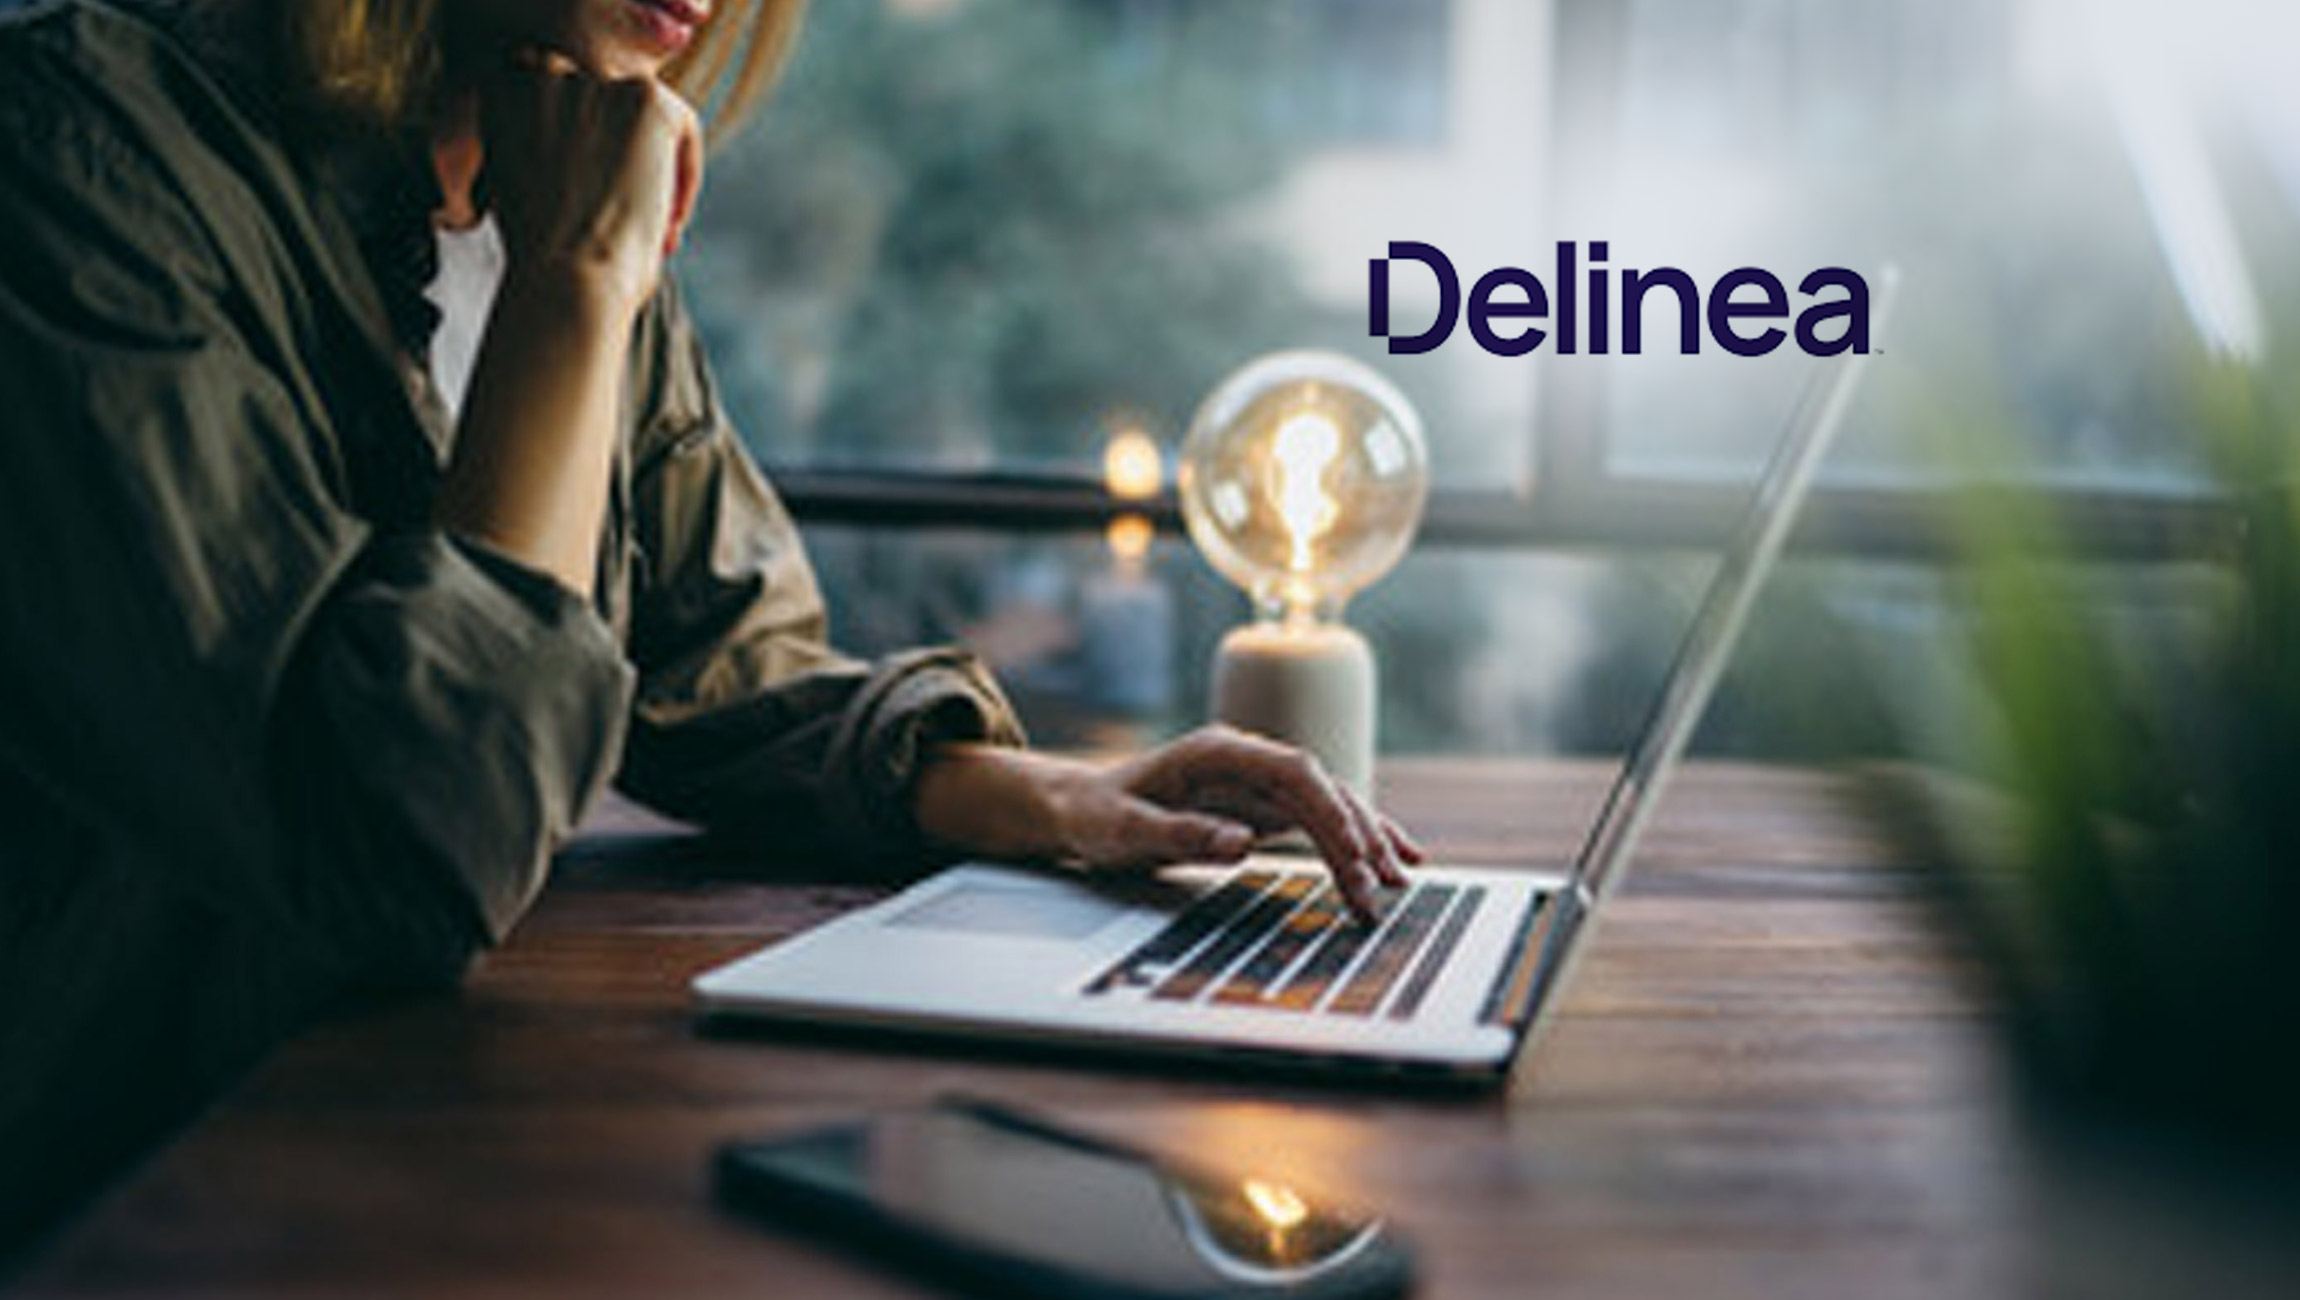 Delinea Secret Server Enhances Disaster Recovery and Introduces VPN-less Session Management Add-On Through Remote Access Service